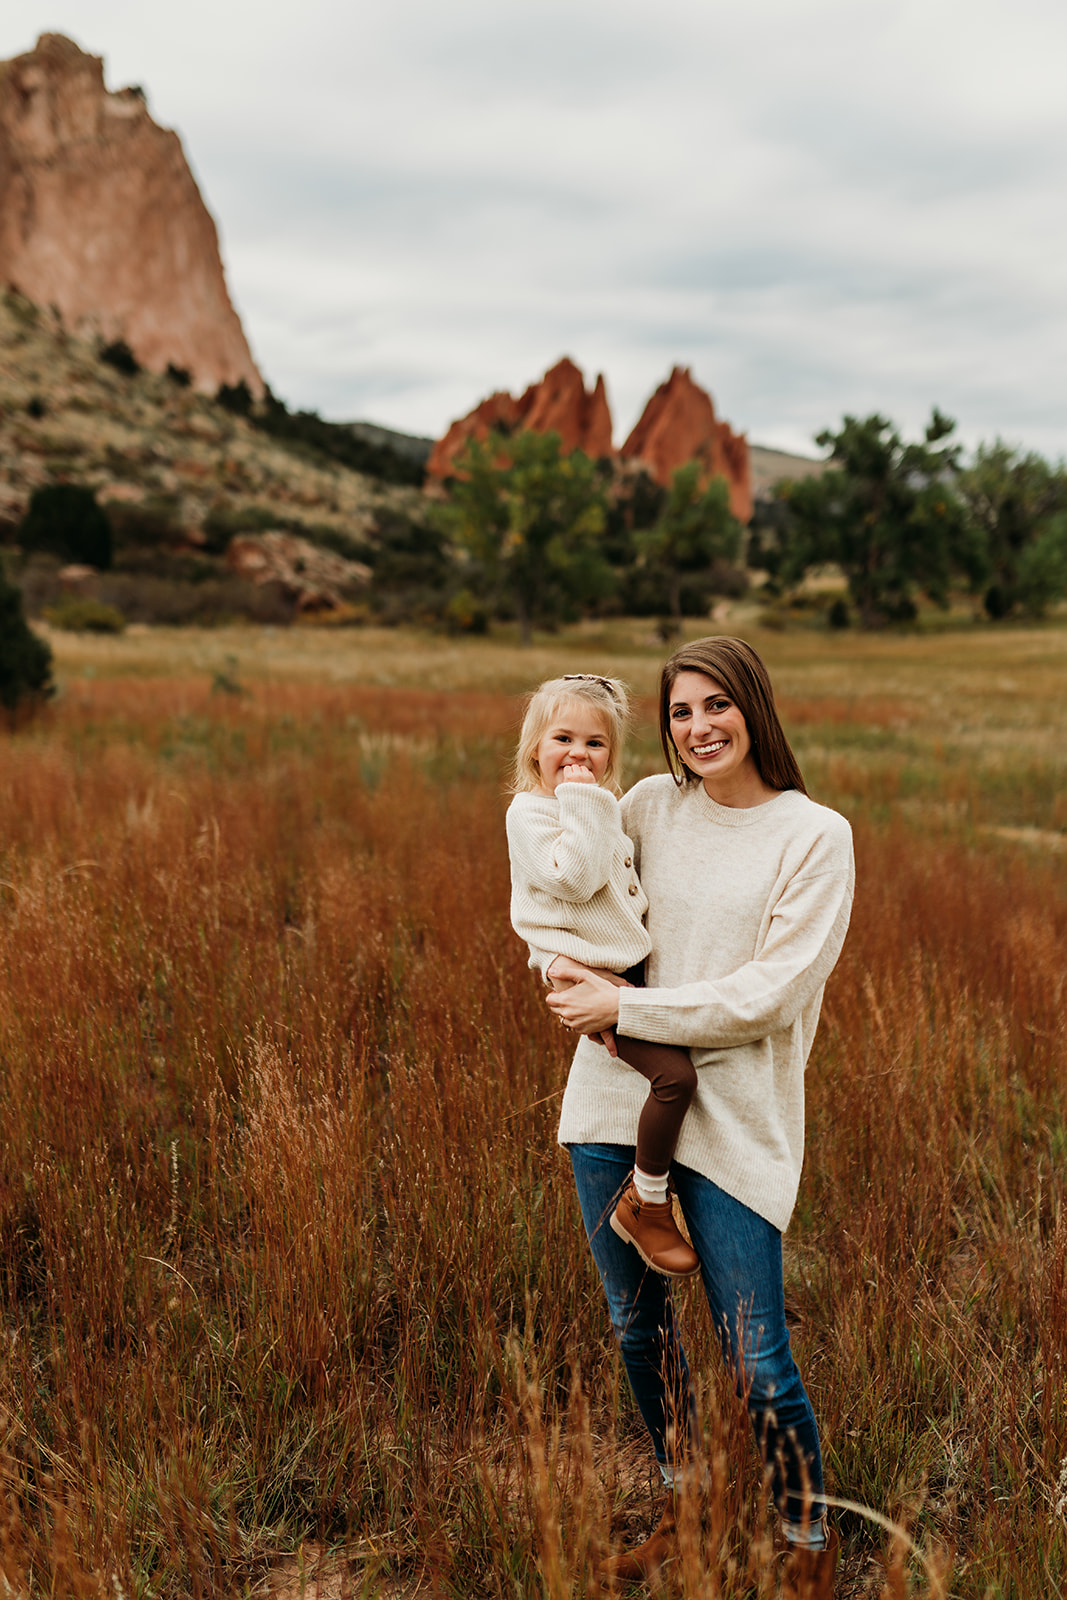 Mom and daughter standing in front of giant boulders at Garden of the Gods Park in Colorado